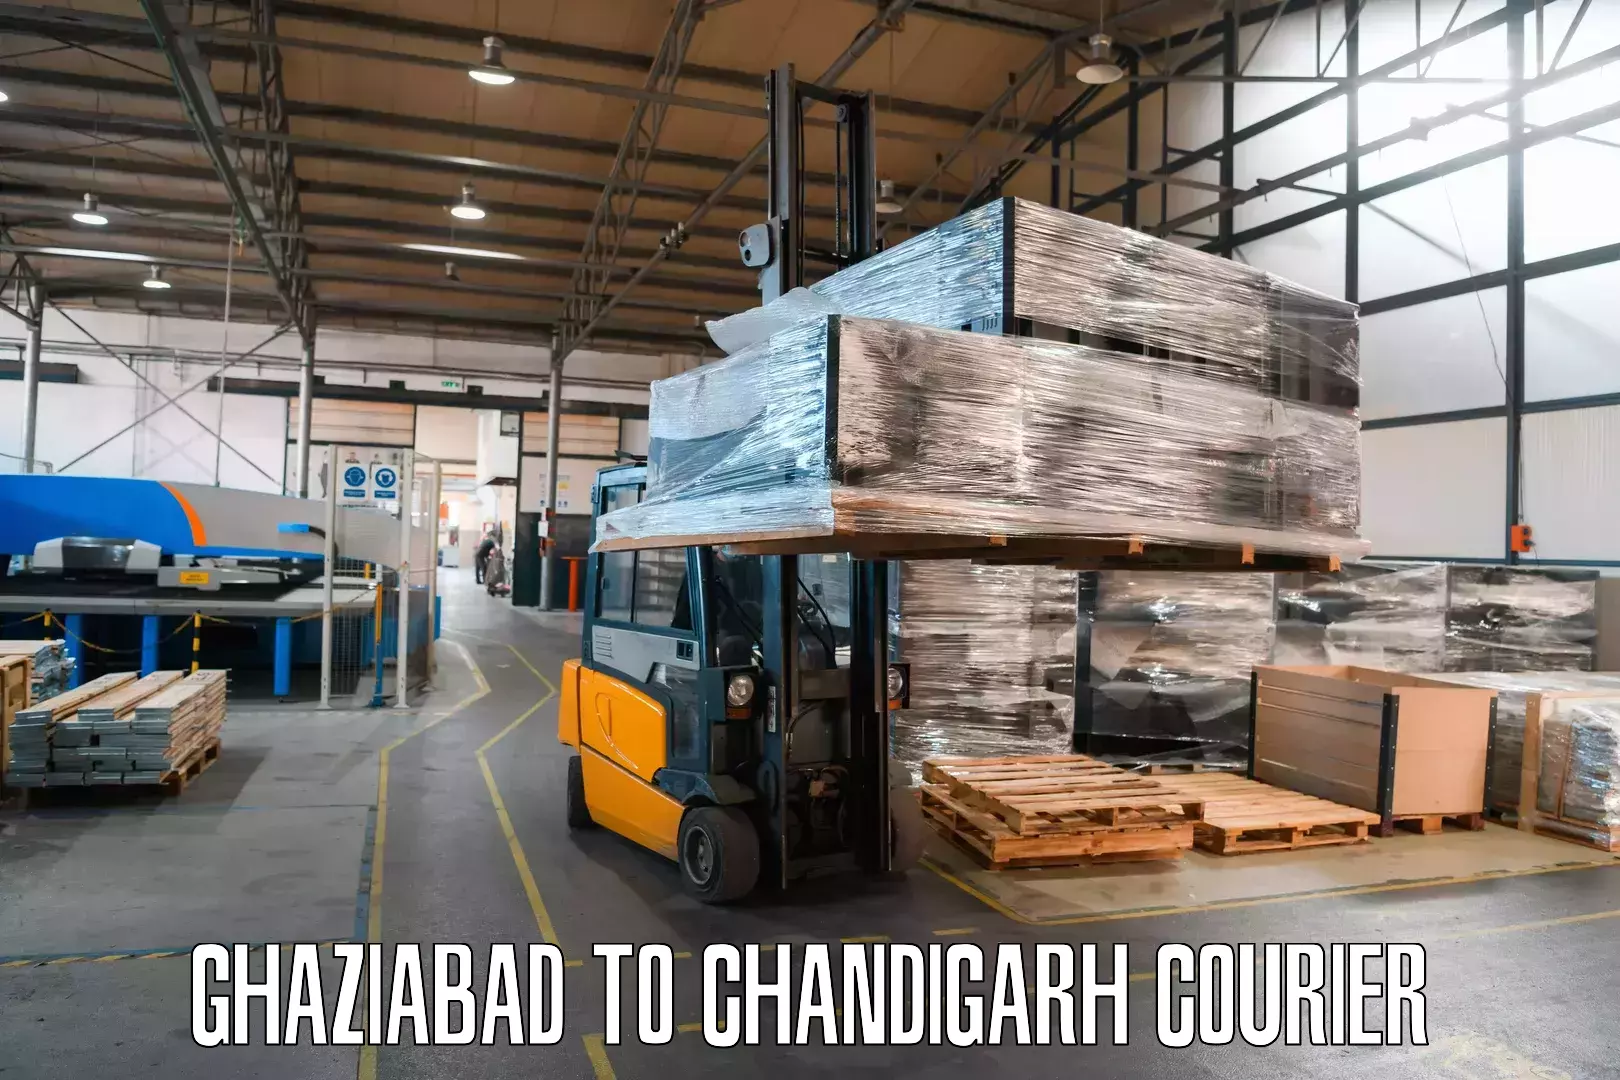 Reliable courier service Ghaziabad to Chandigarh